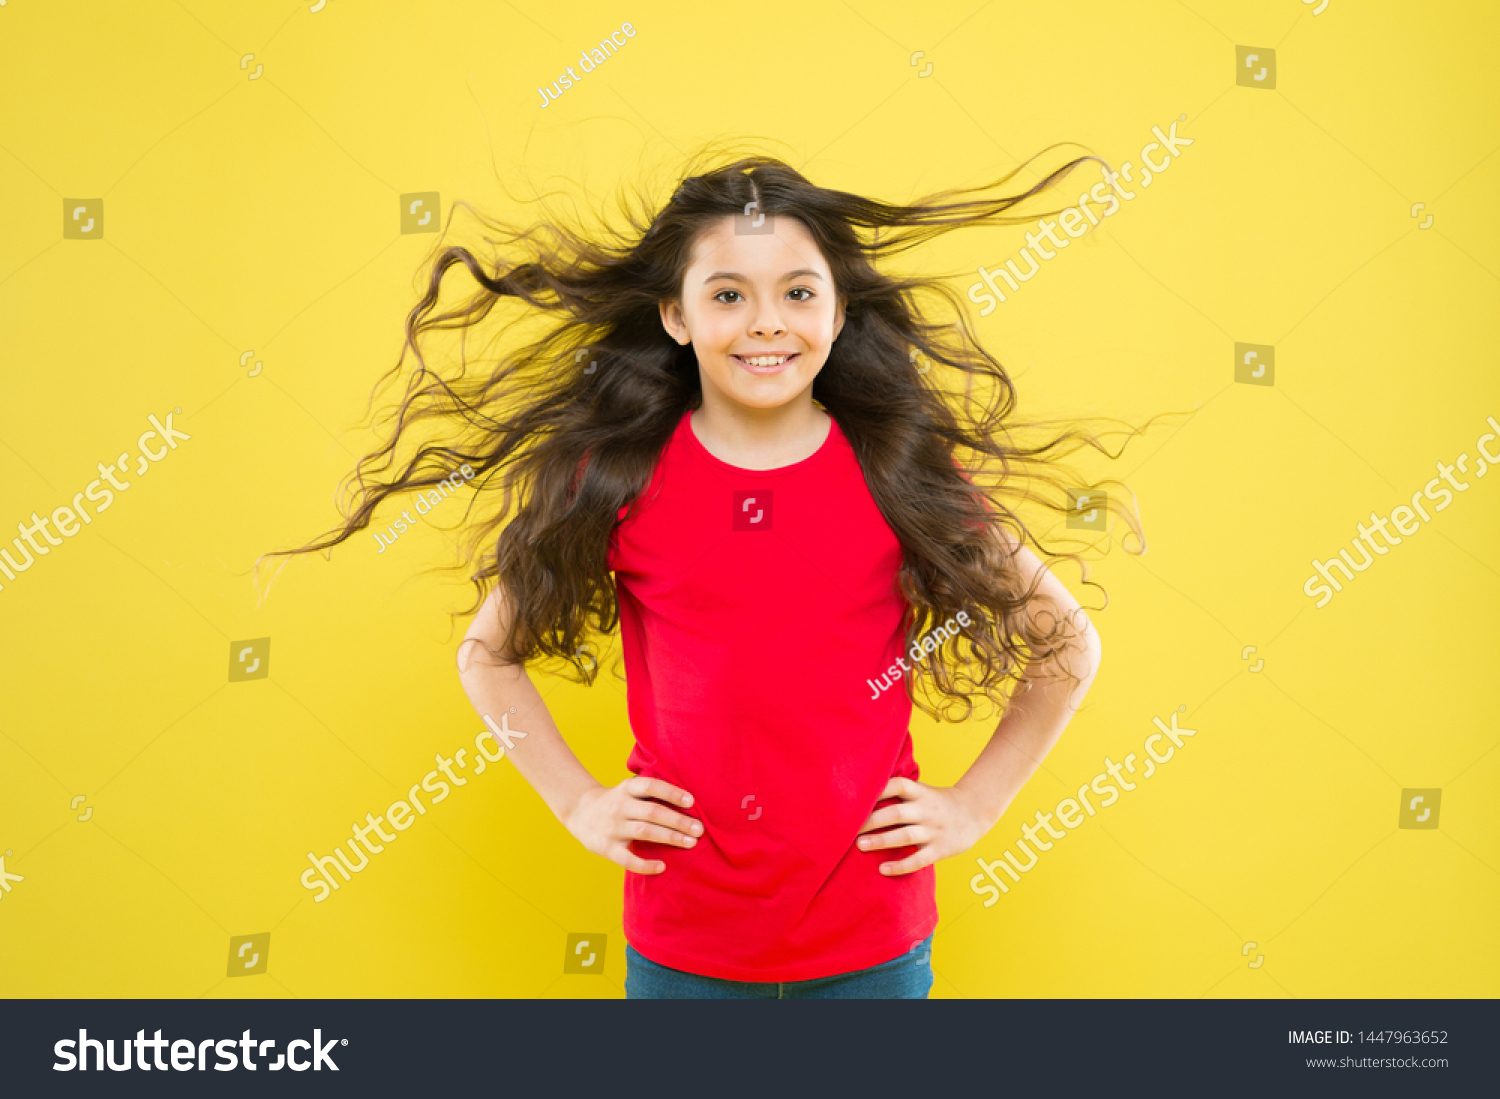 Kid Cute Face Adorable Curly Hairstyle People Education